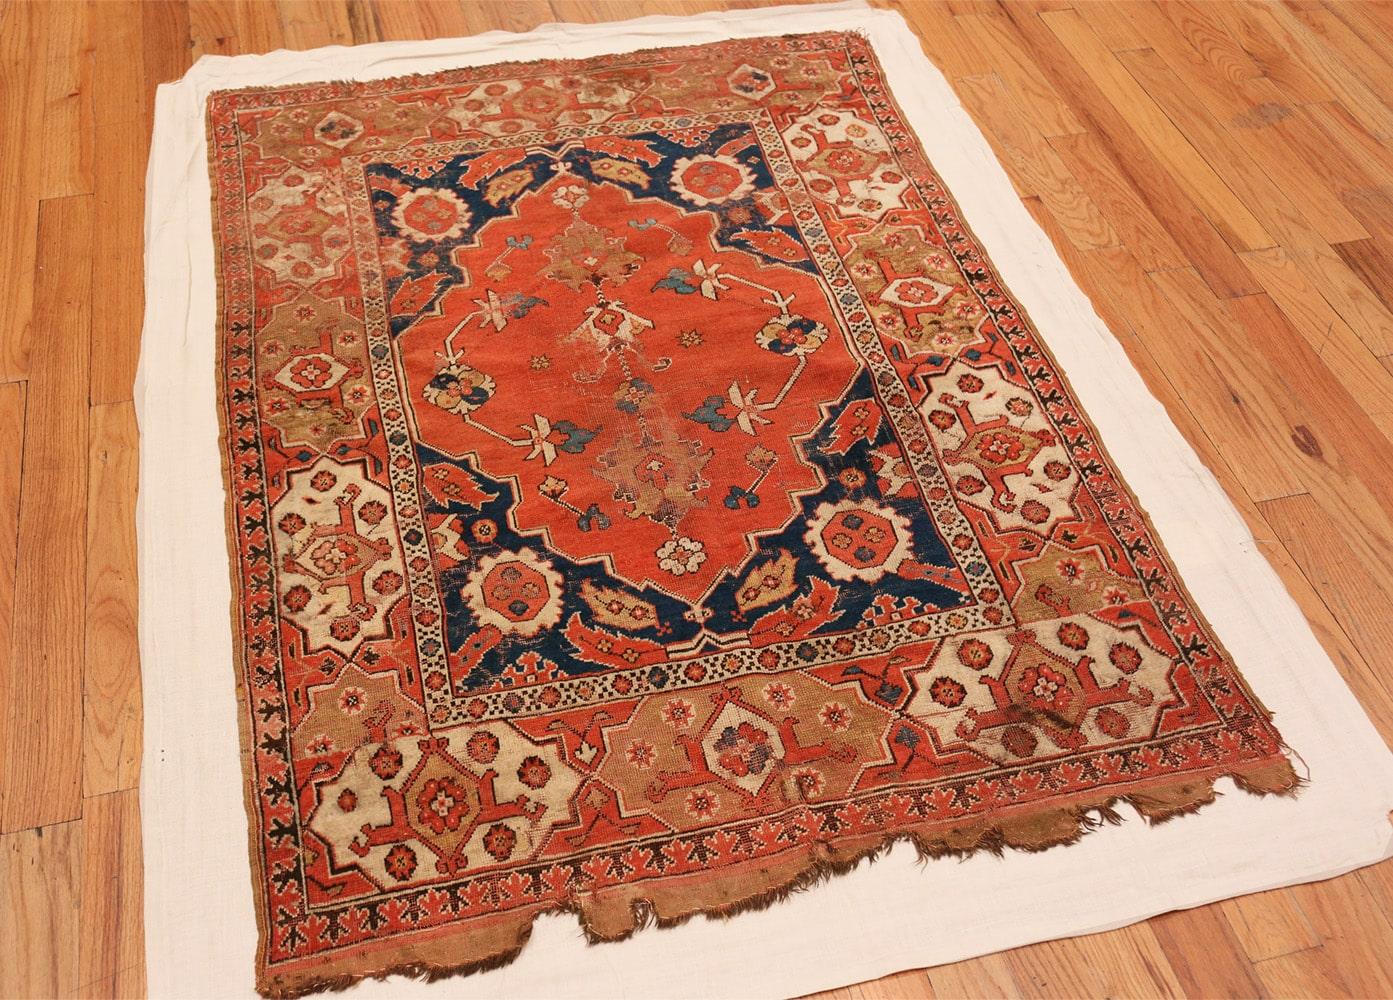 Romanian Nazmiyal Antique 17th Century Transylvanian Rug. 3 ft 10 in x 5 ft 3 in 